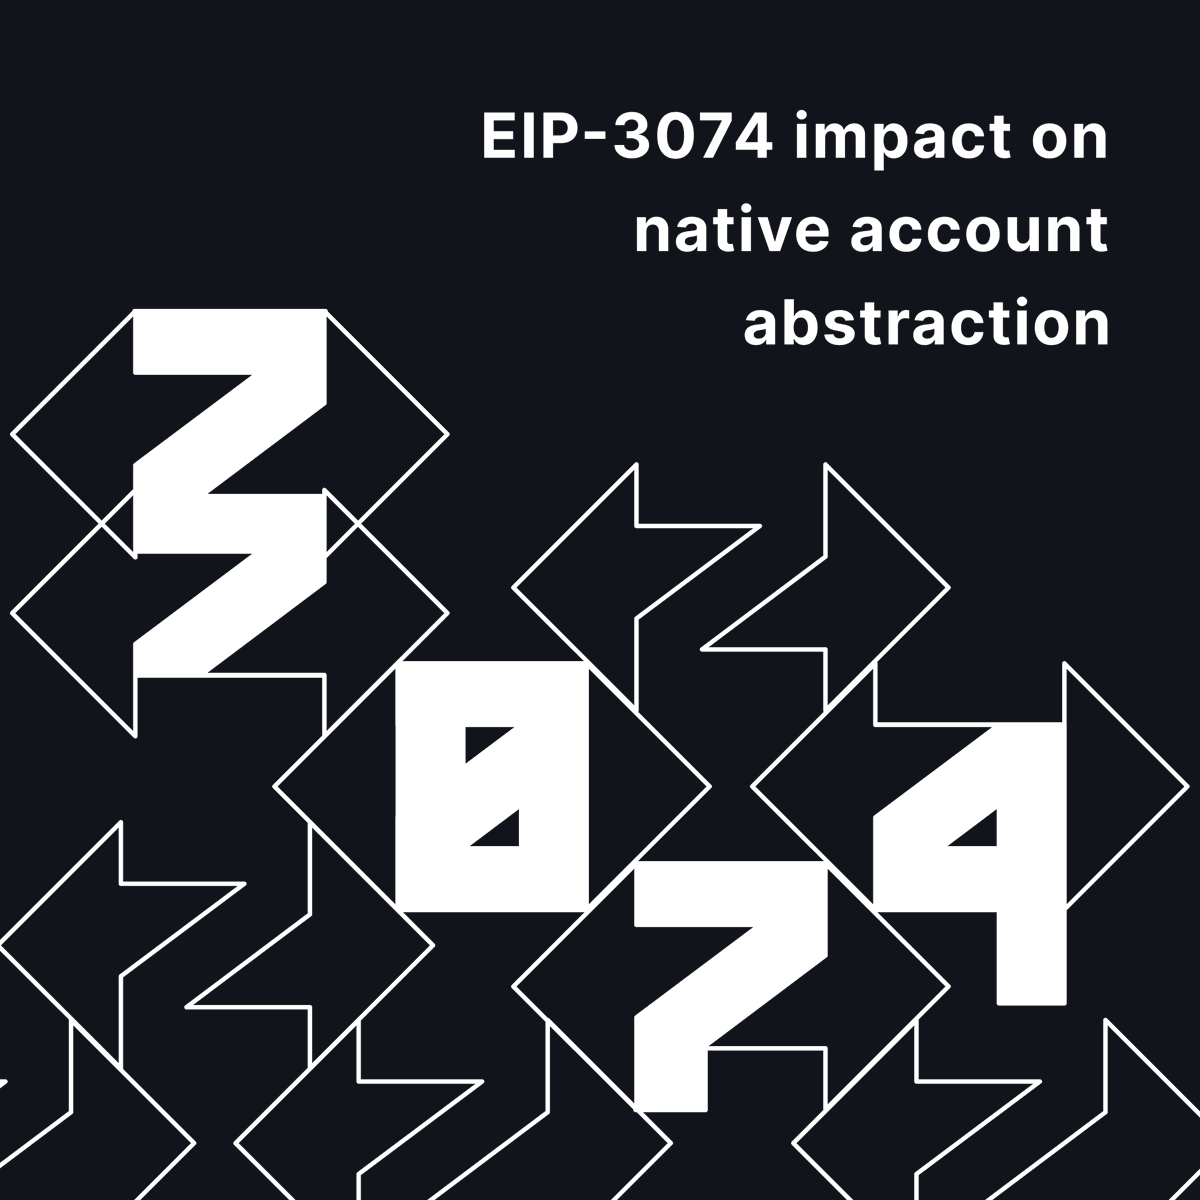 EIP-3074 impact on native account abstraction With EIP-3074 approval to go live in the Prague/Electra hard fork, here are some thoughts on how this will affect: - Account abstraction, EIP-4337 - Security for users and rollups - Native Account abstraction